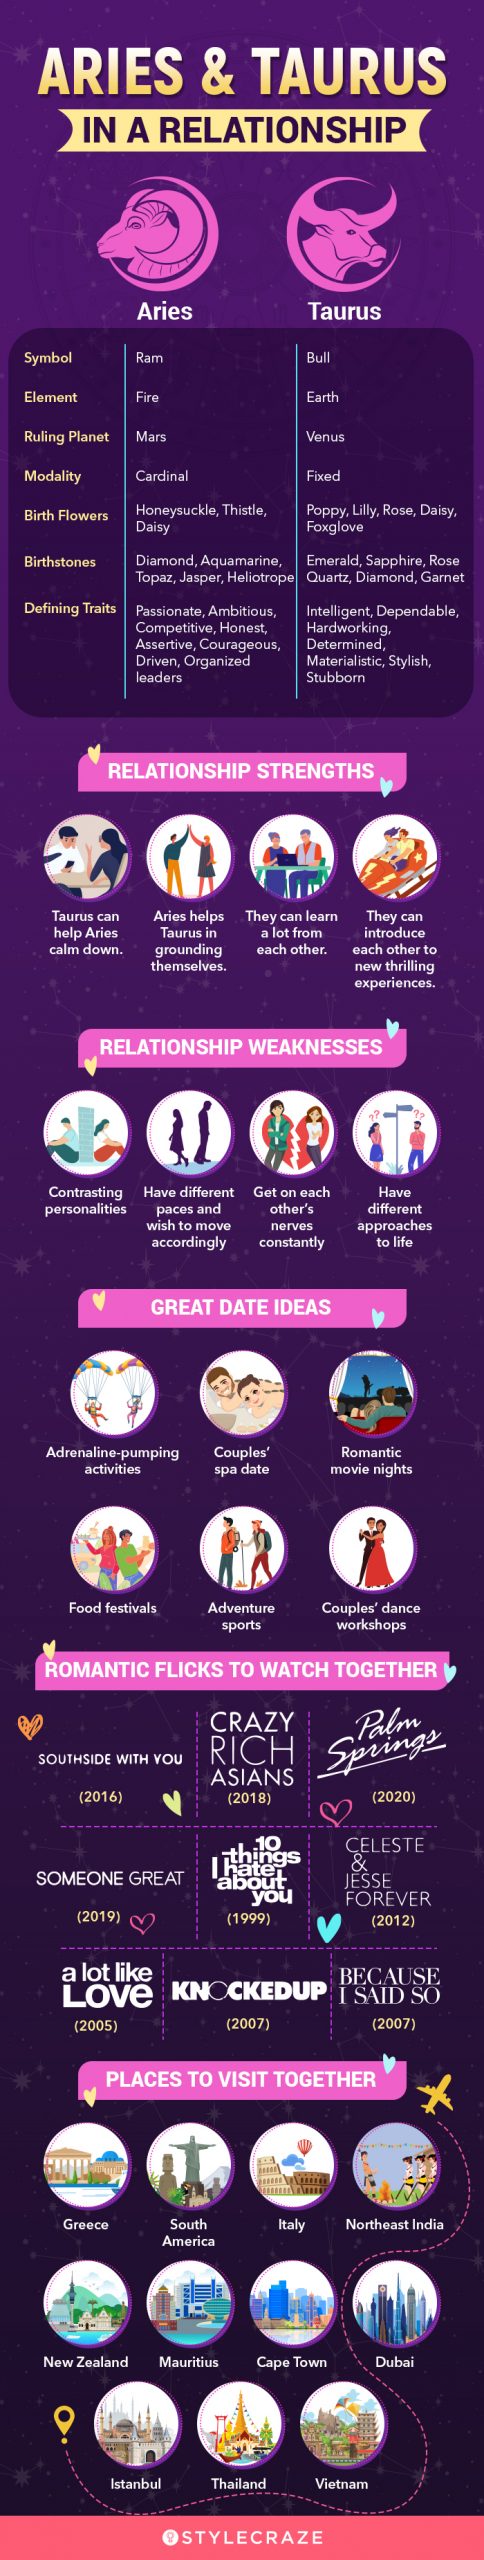 Friendship Compatibility Between Aries And Taurus